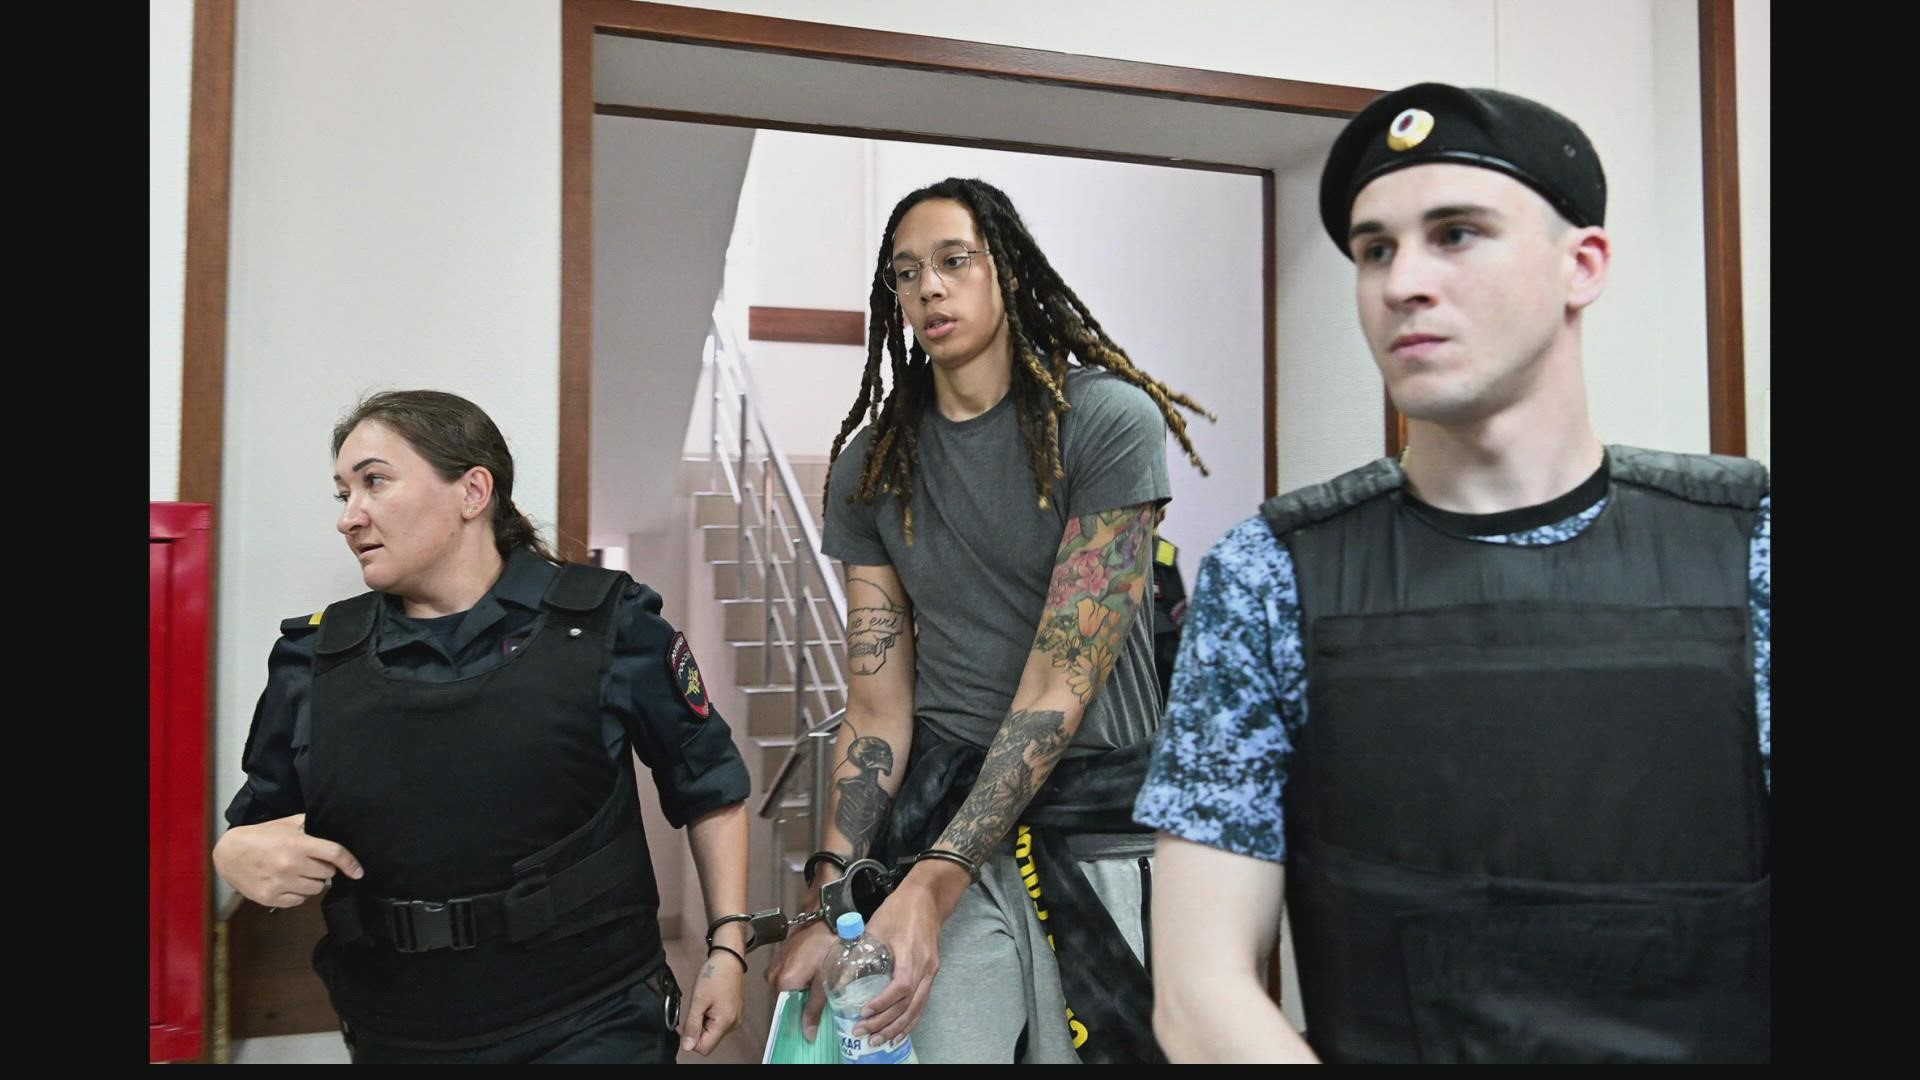 Brittney Griner's Russian trial finally started, four months after she was detained. Griner is facing drug charges that could land her in prison for up to 10 years.